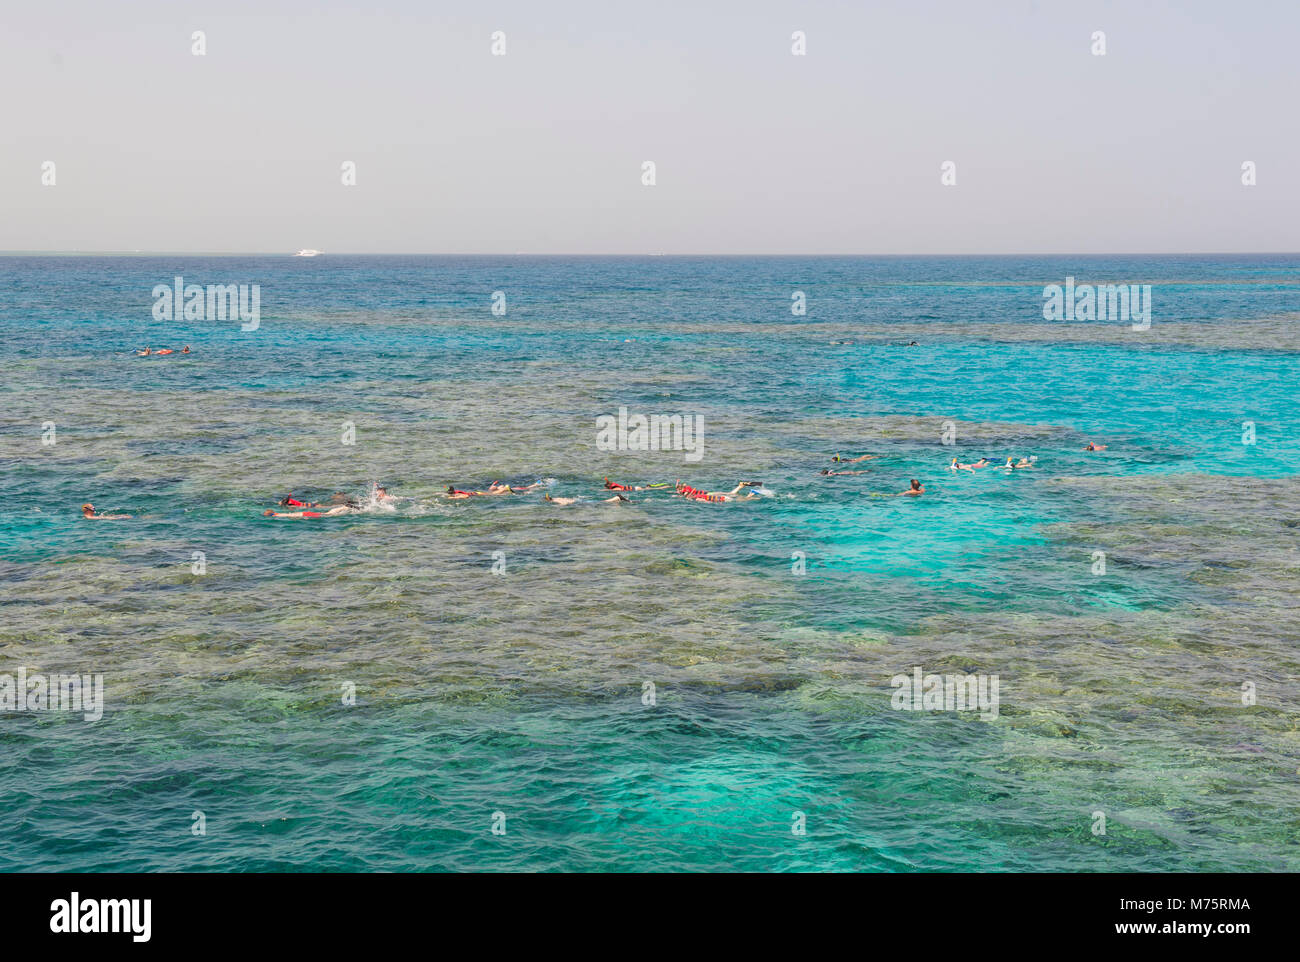 Nature view of large coral reef scene in tropical sea ocean with snorkelers Stock Photo